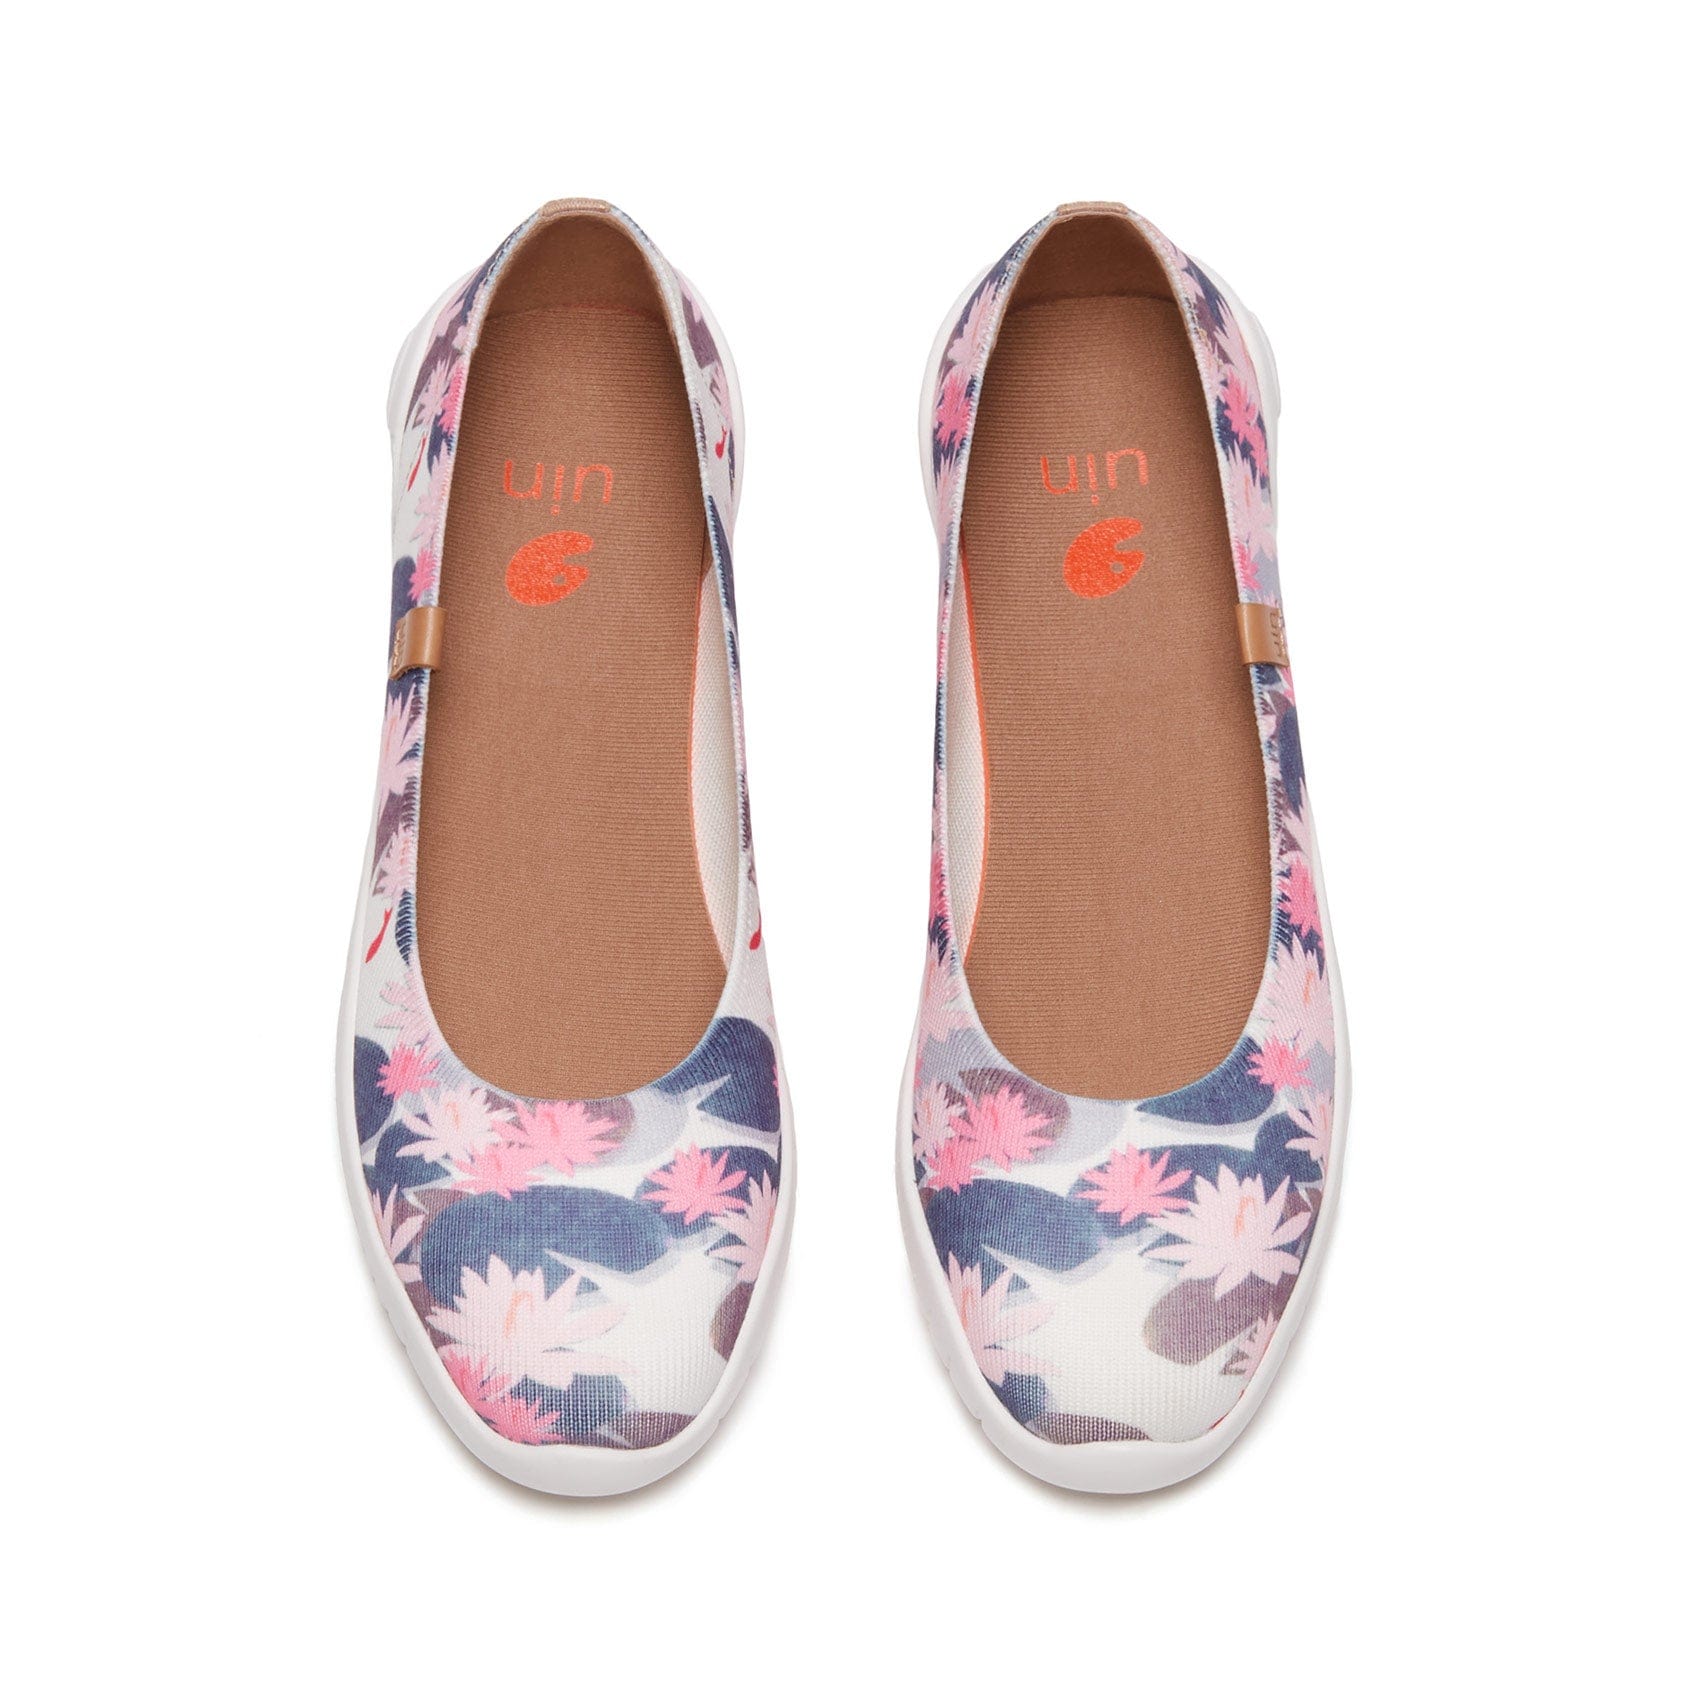 Monet The Water-Lily Pond V1 Minorca Women Art Travel Shoes | UIN ...